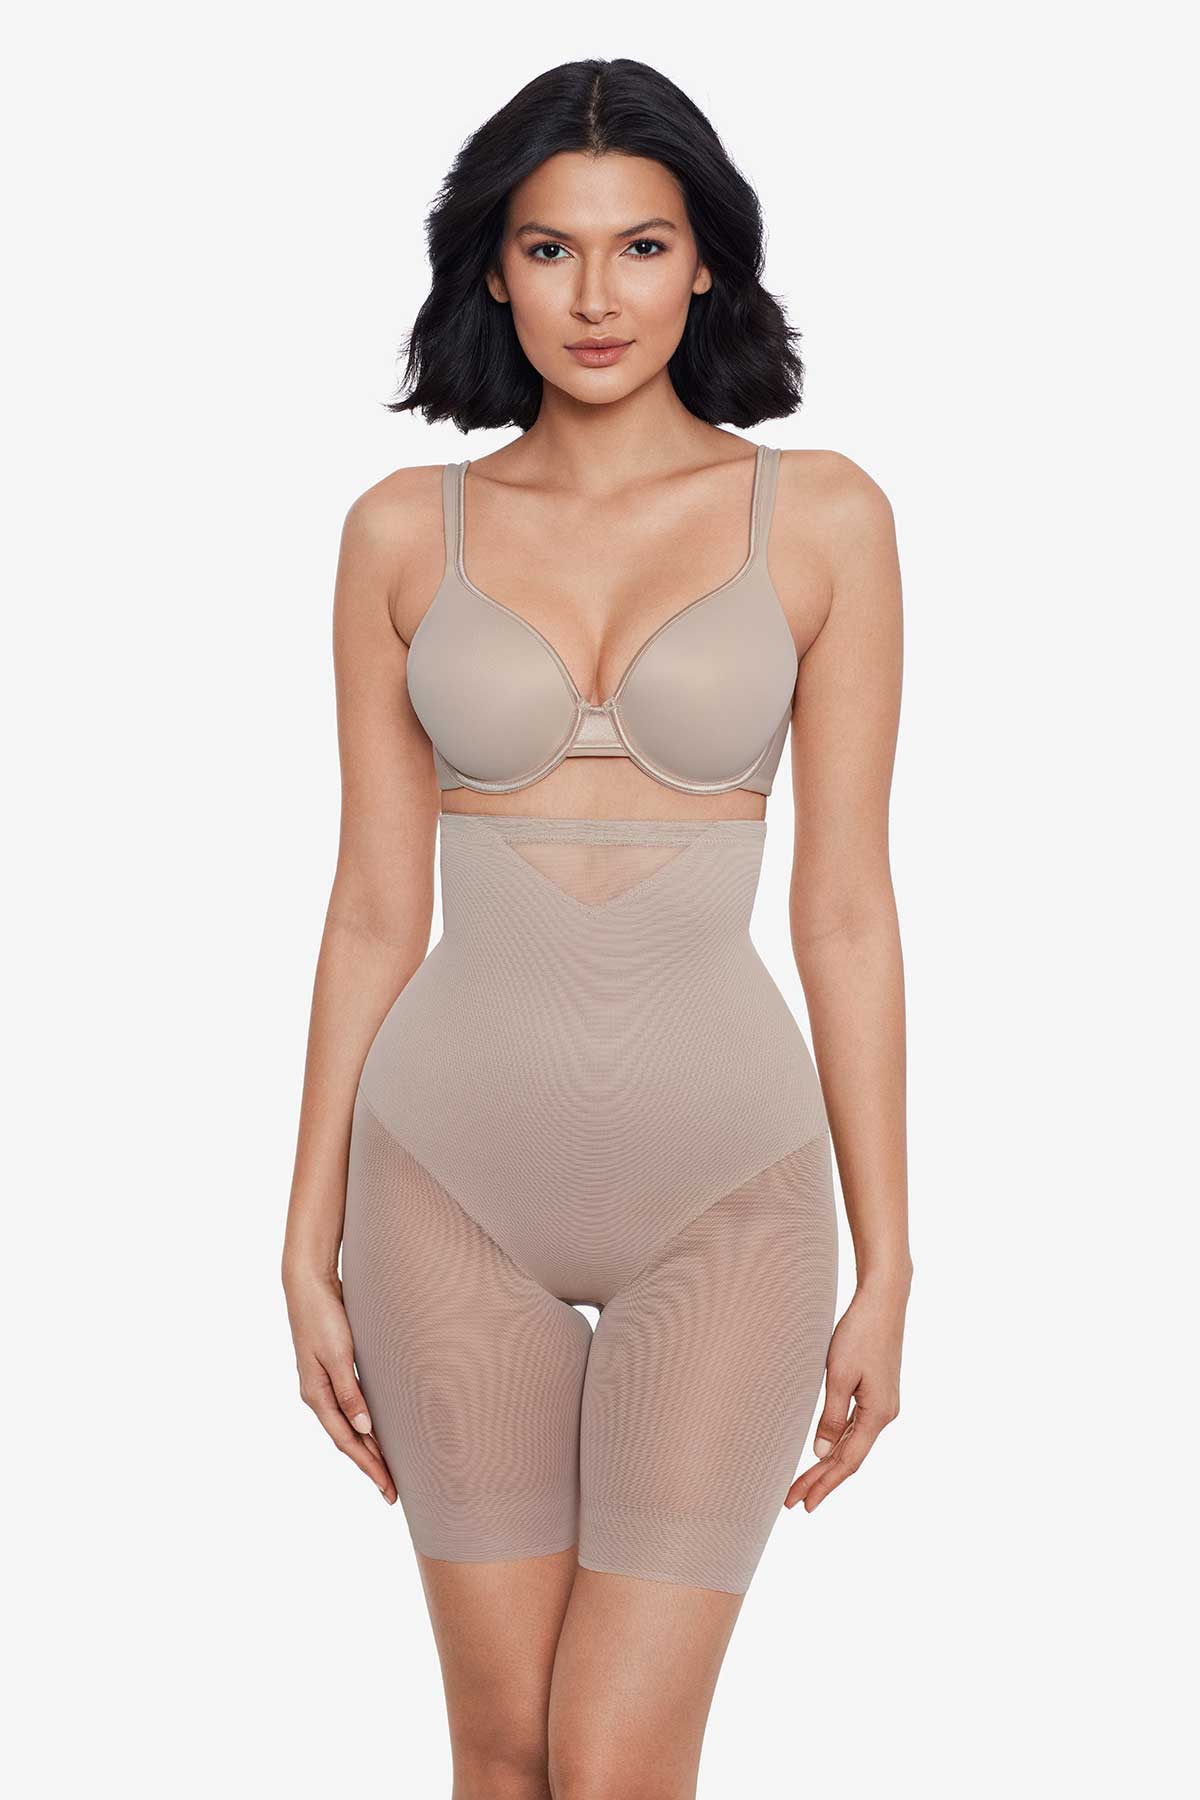 SLIM SHAPER BY Miracle Brands Hi-Waist Slip Extra Firm Control Nude XXL  $21.49 - PicClick